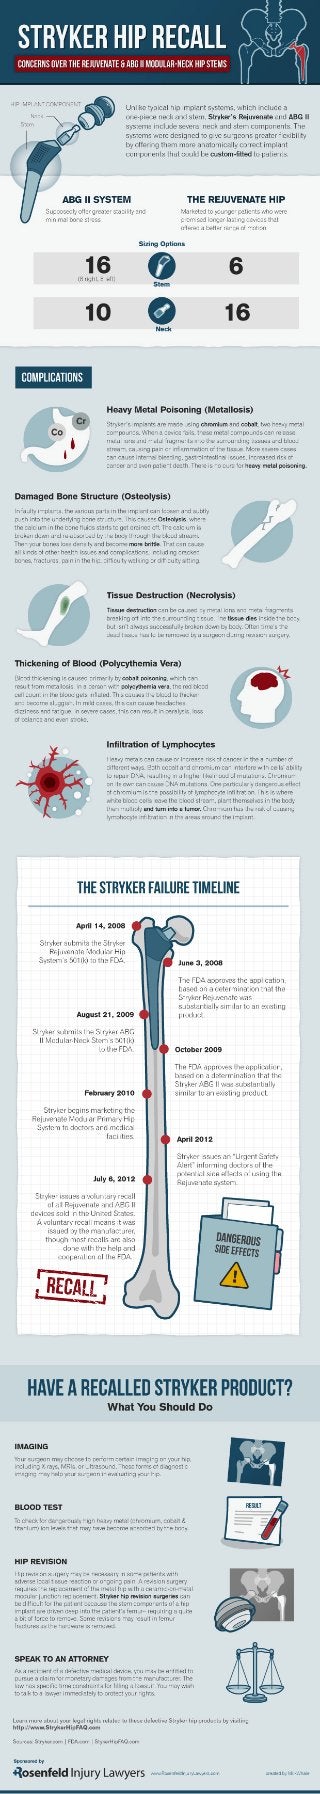 Stryker Hip Recall – An Infographic By Hip Defect Attorneys